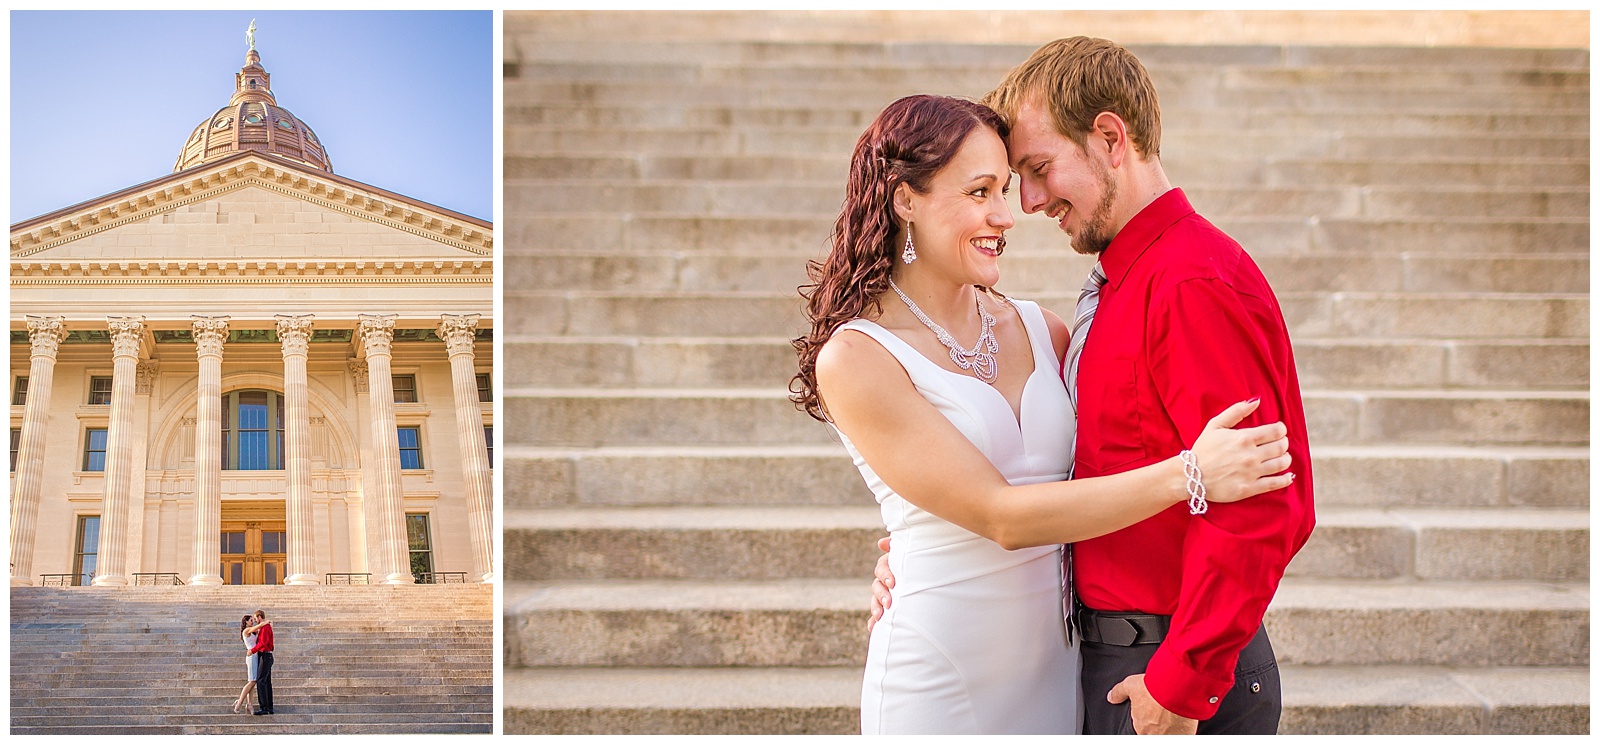 An engagement session at the Kansas State Capitol Building in Topeka.